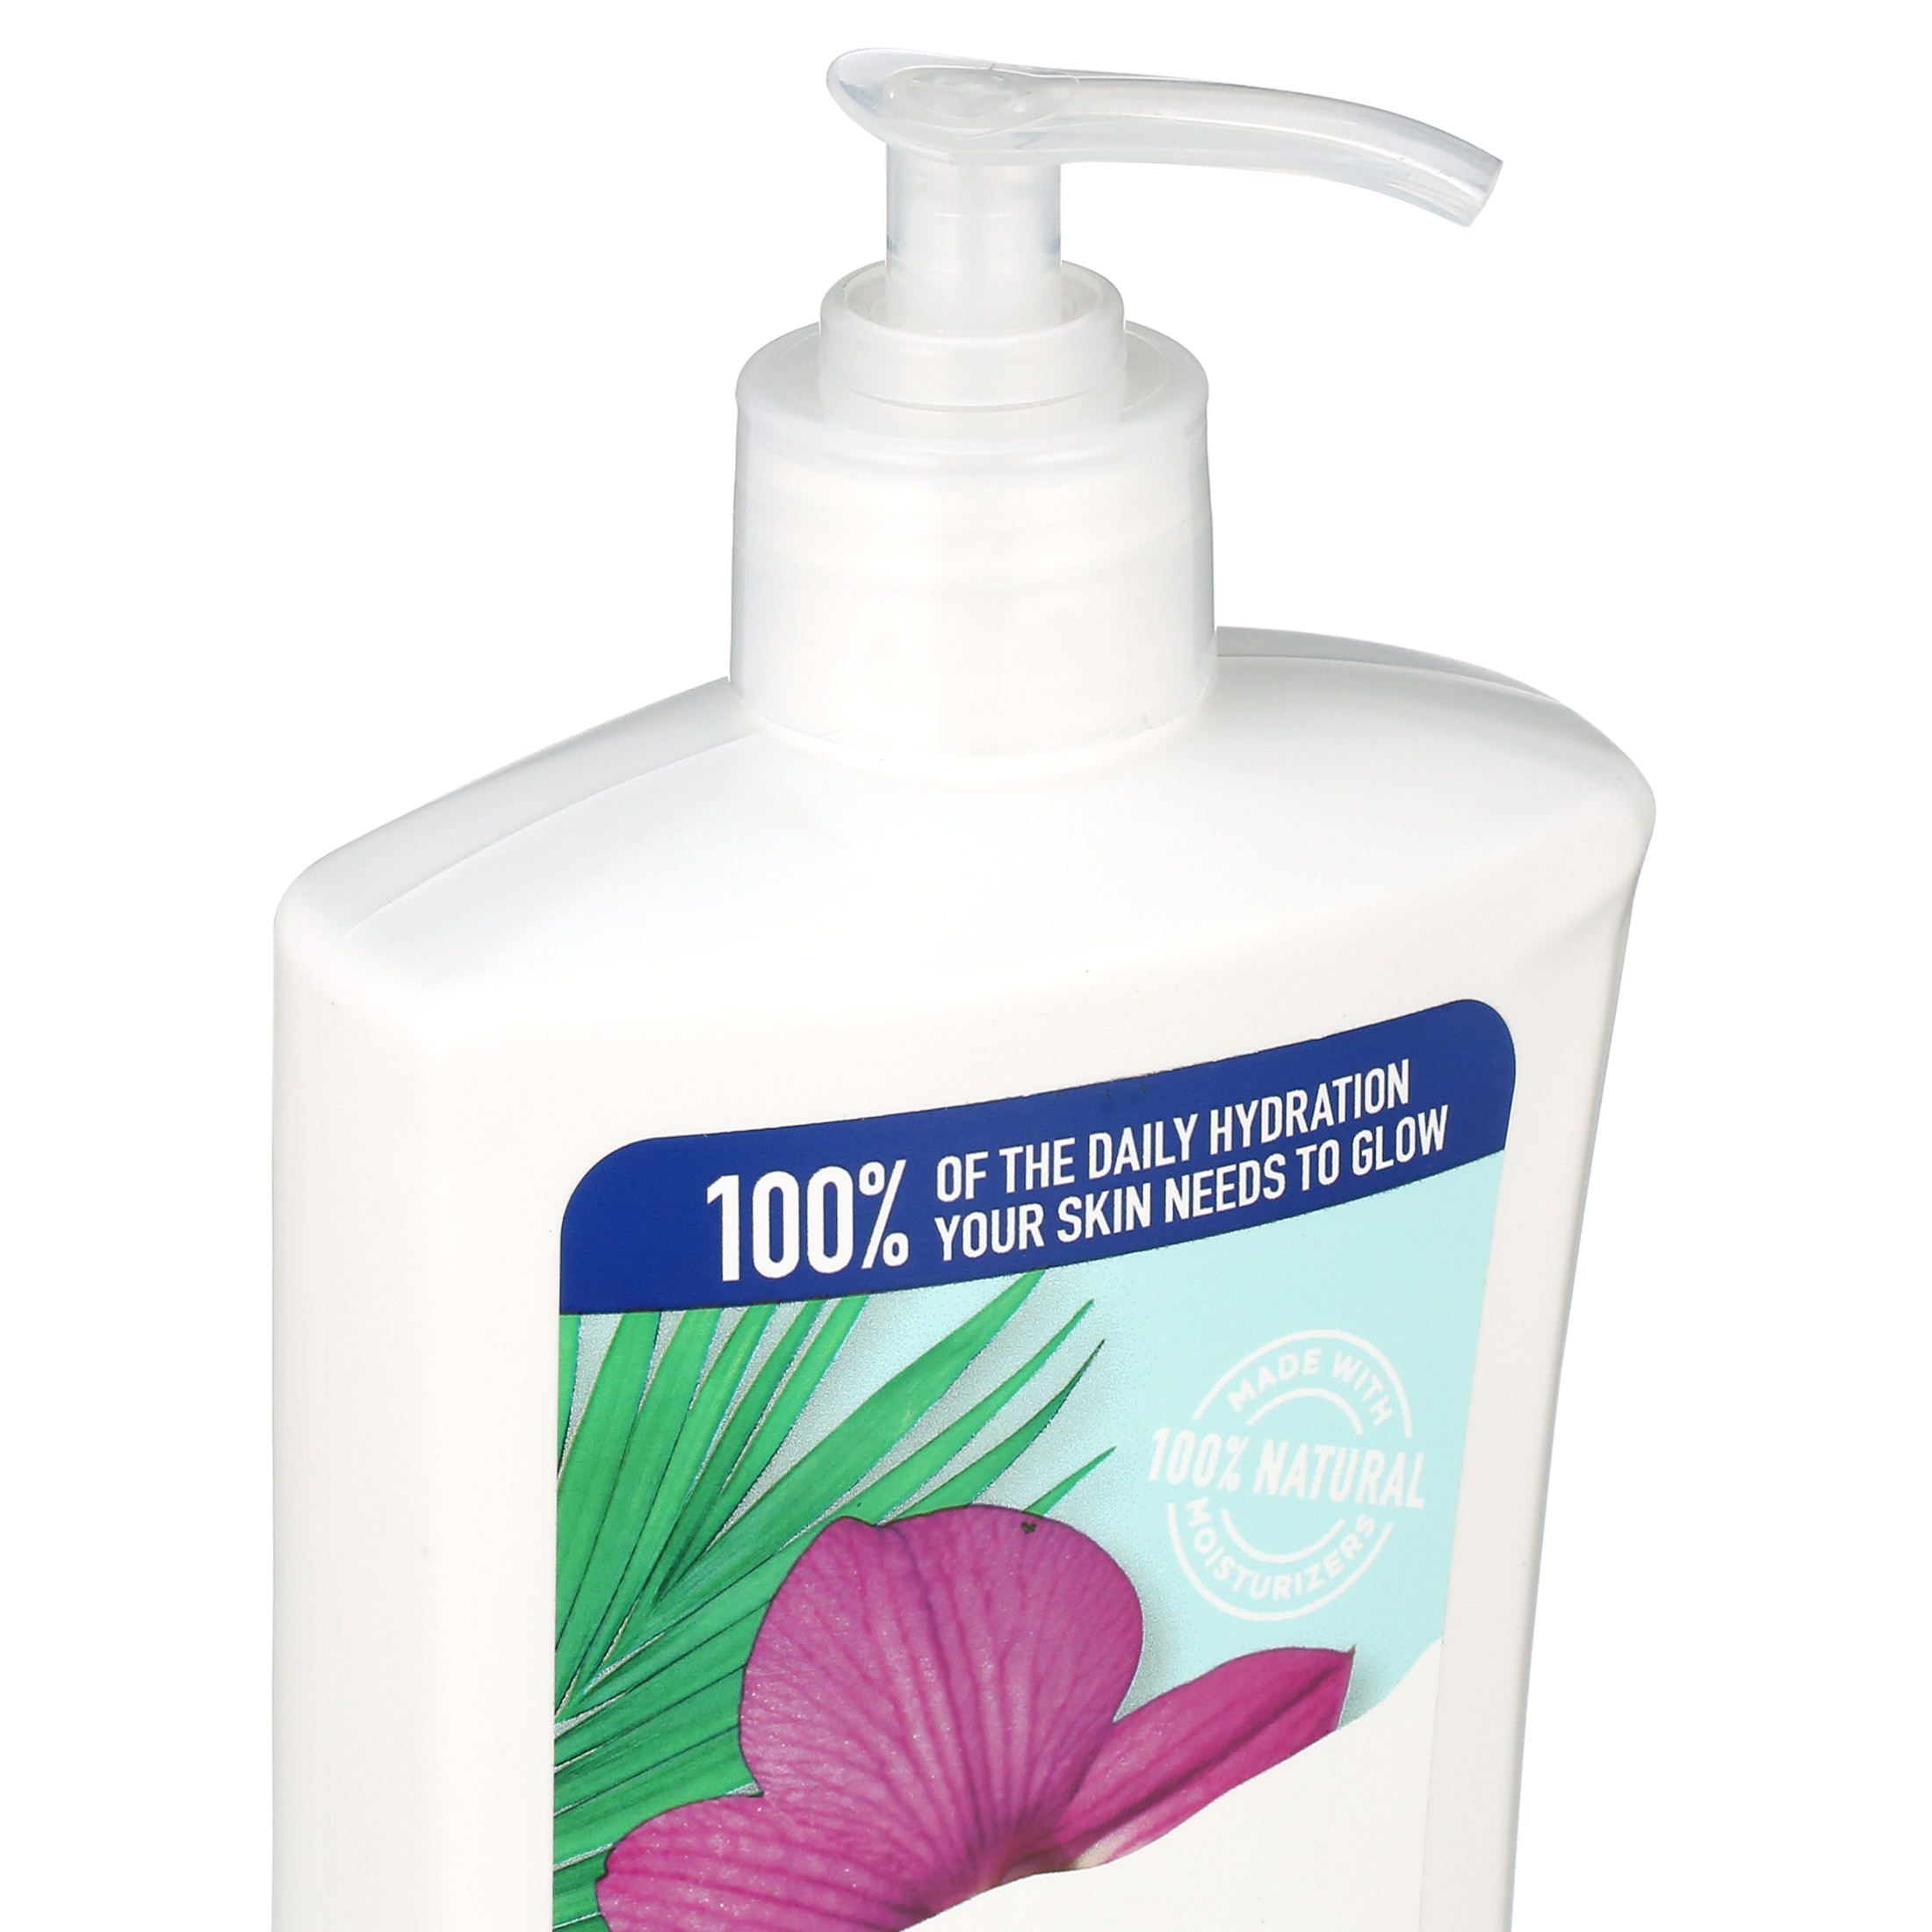 St. Ives Softening Body Lotion Coconut and Orchid 21 oz - image 9 of 10